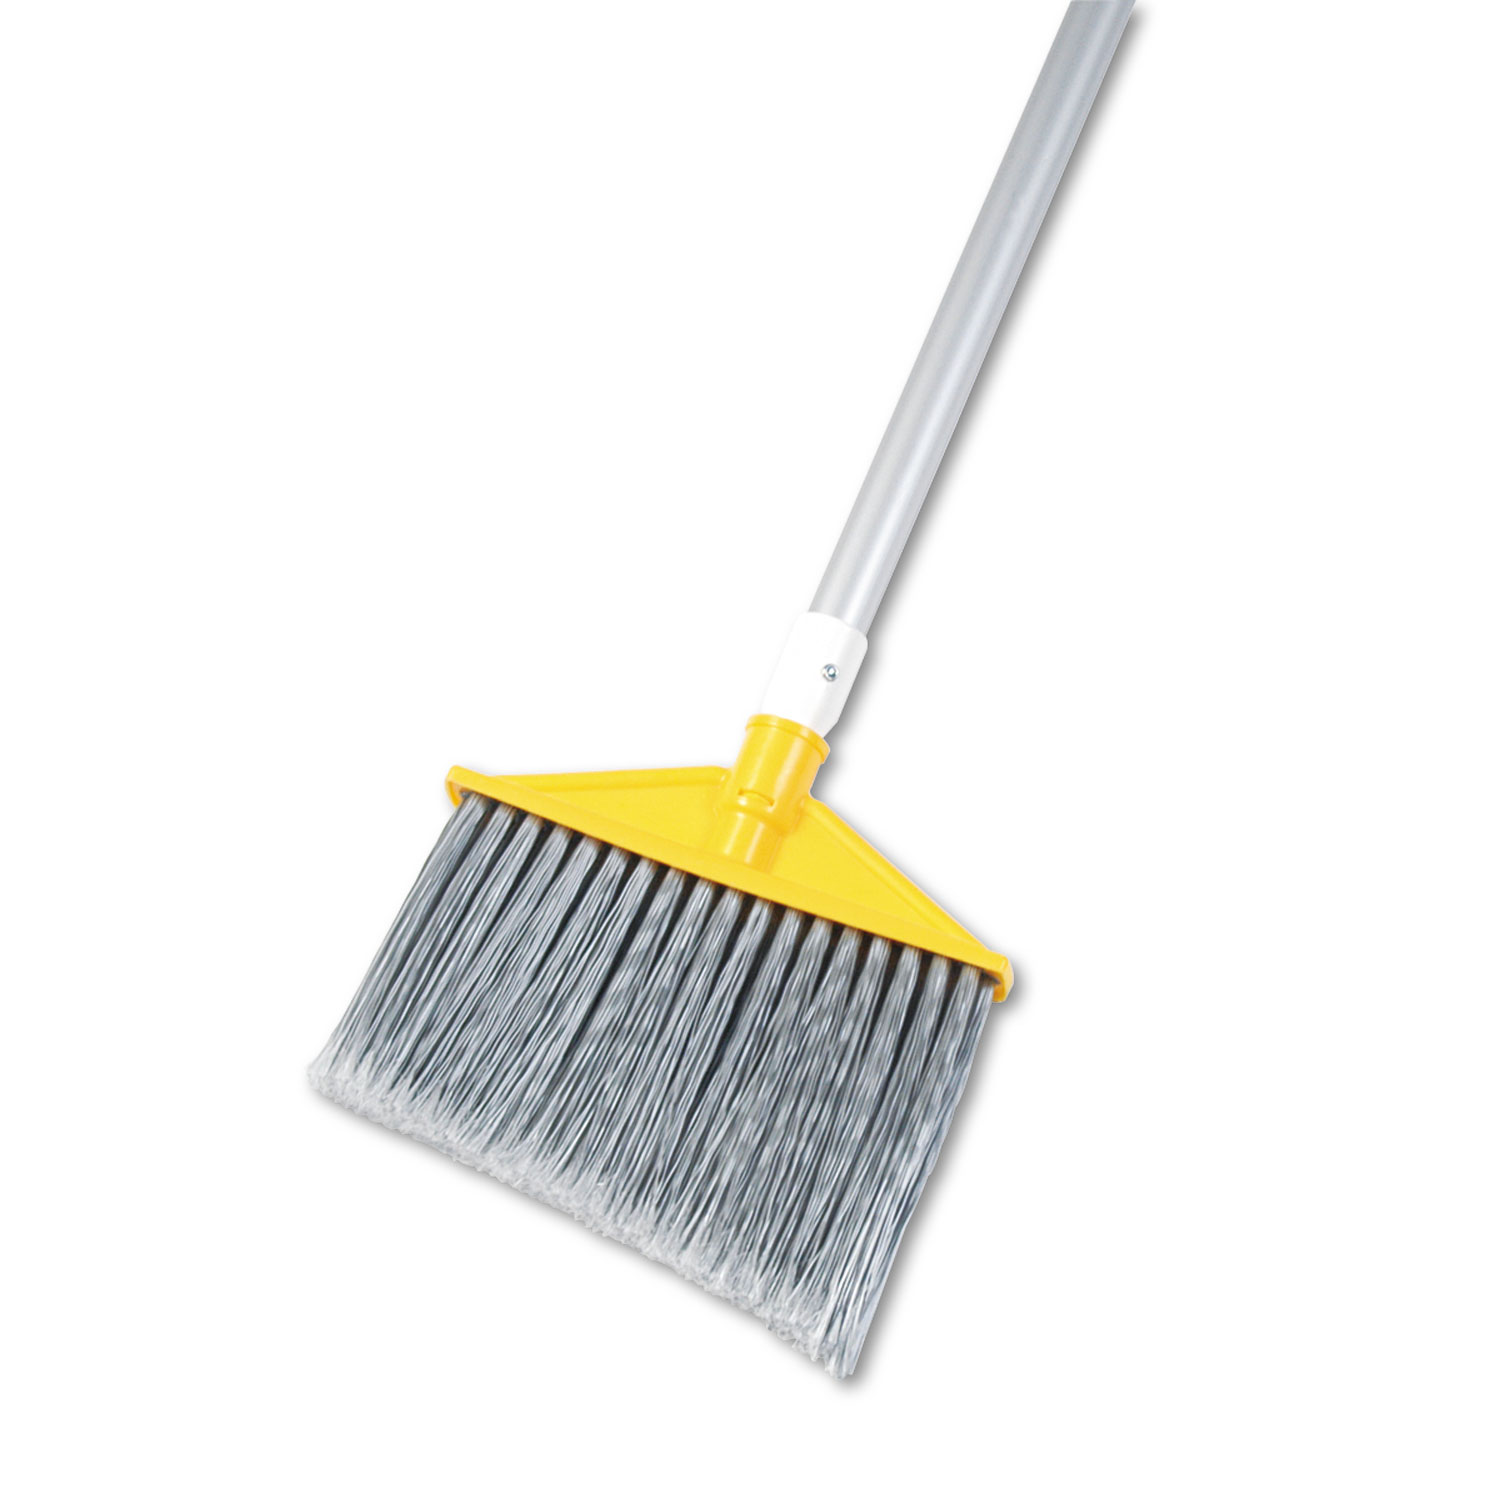  Rubbermaid Commercial Products Heavy-Duty Corn Broom